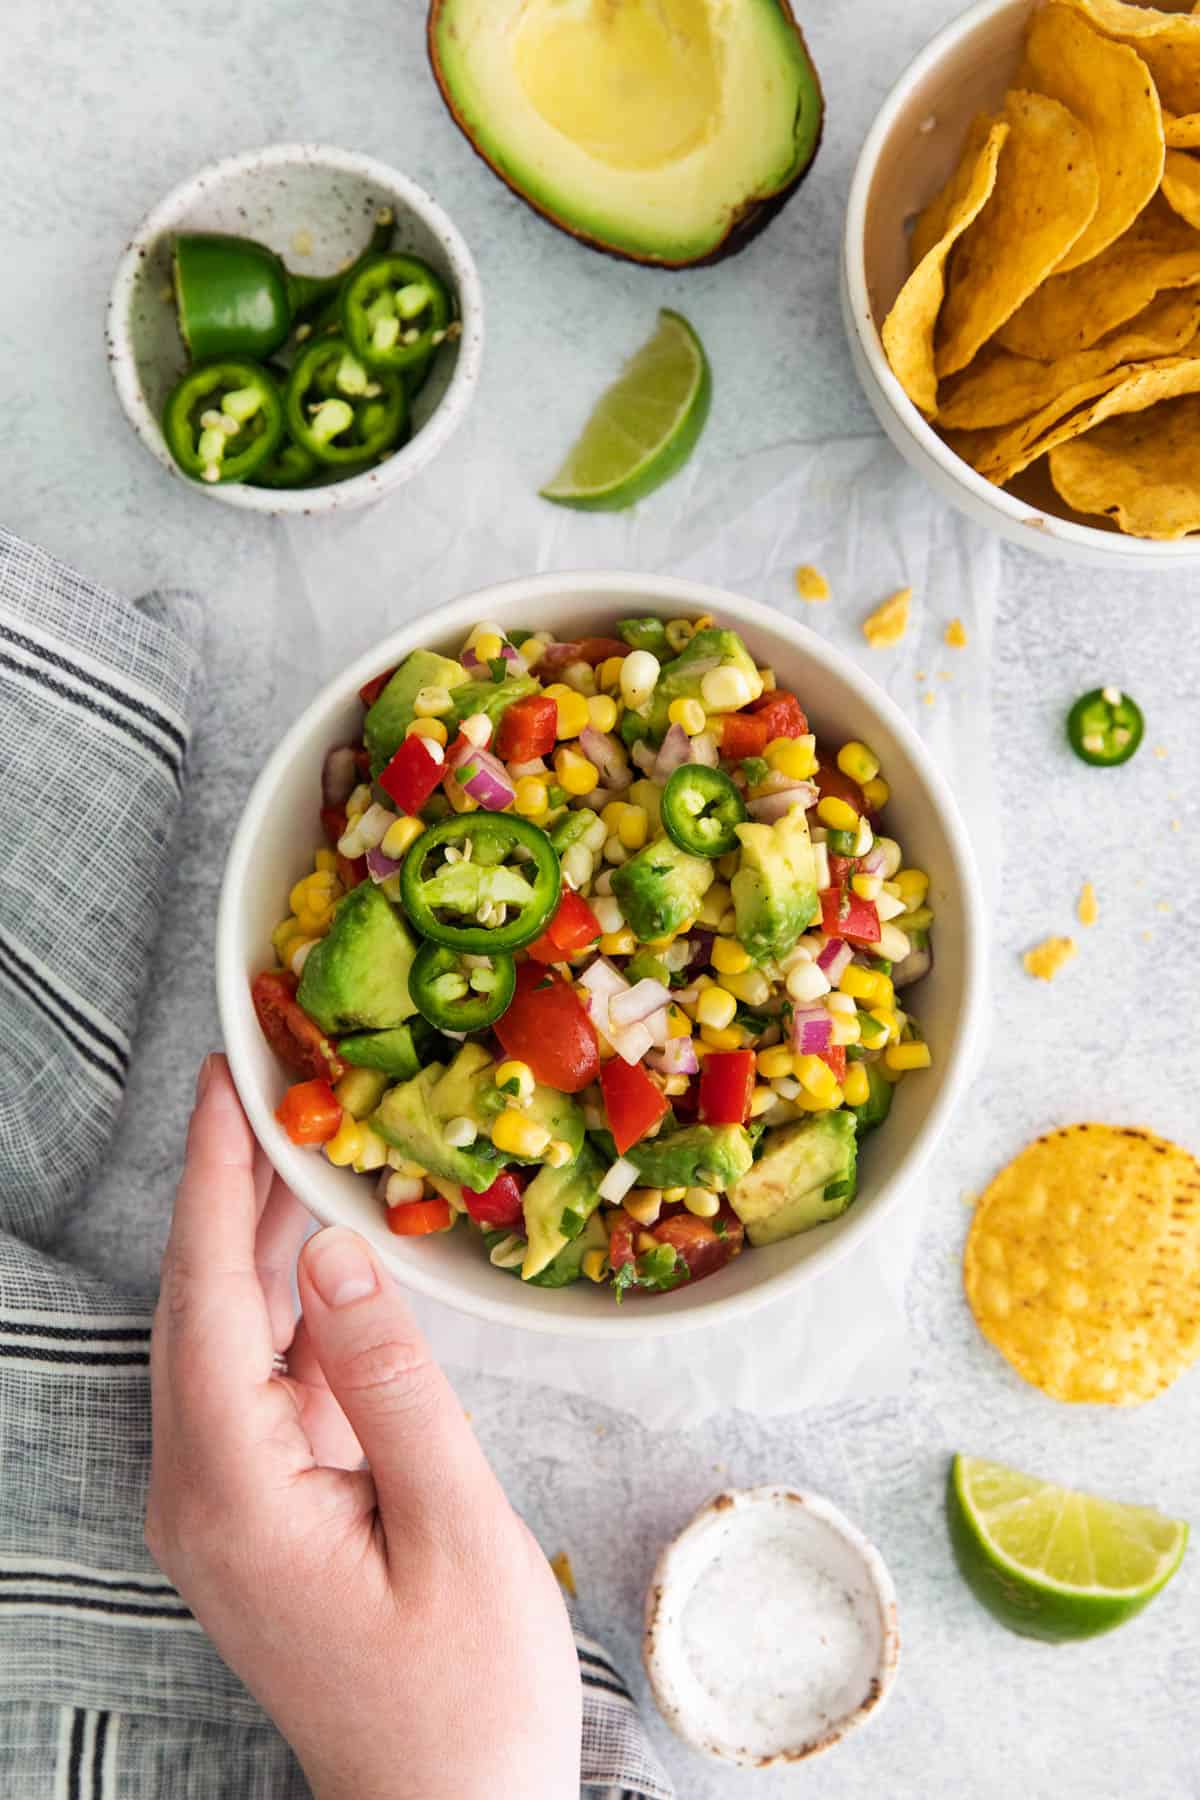 A hand reaching for a bowl of corn and avocado salad.